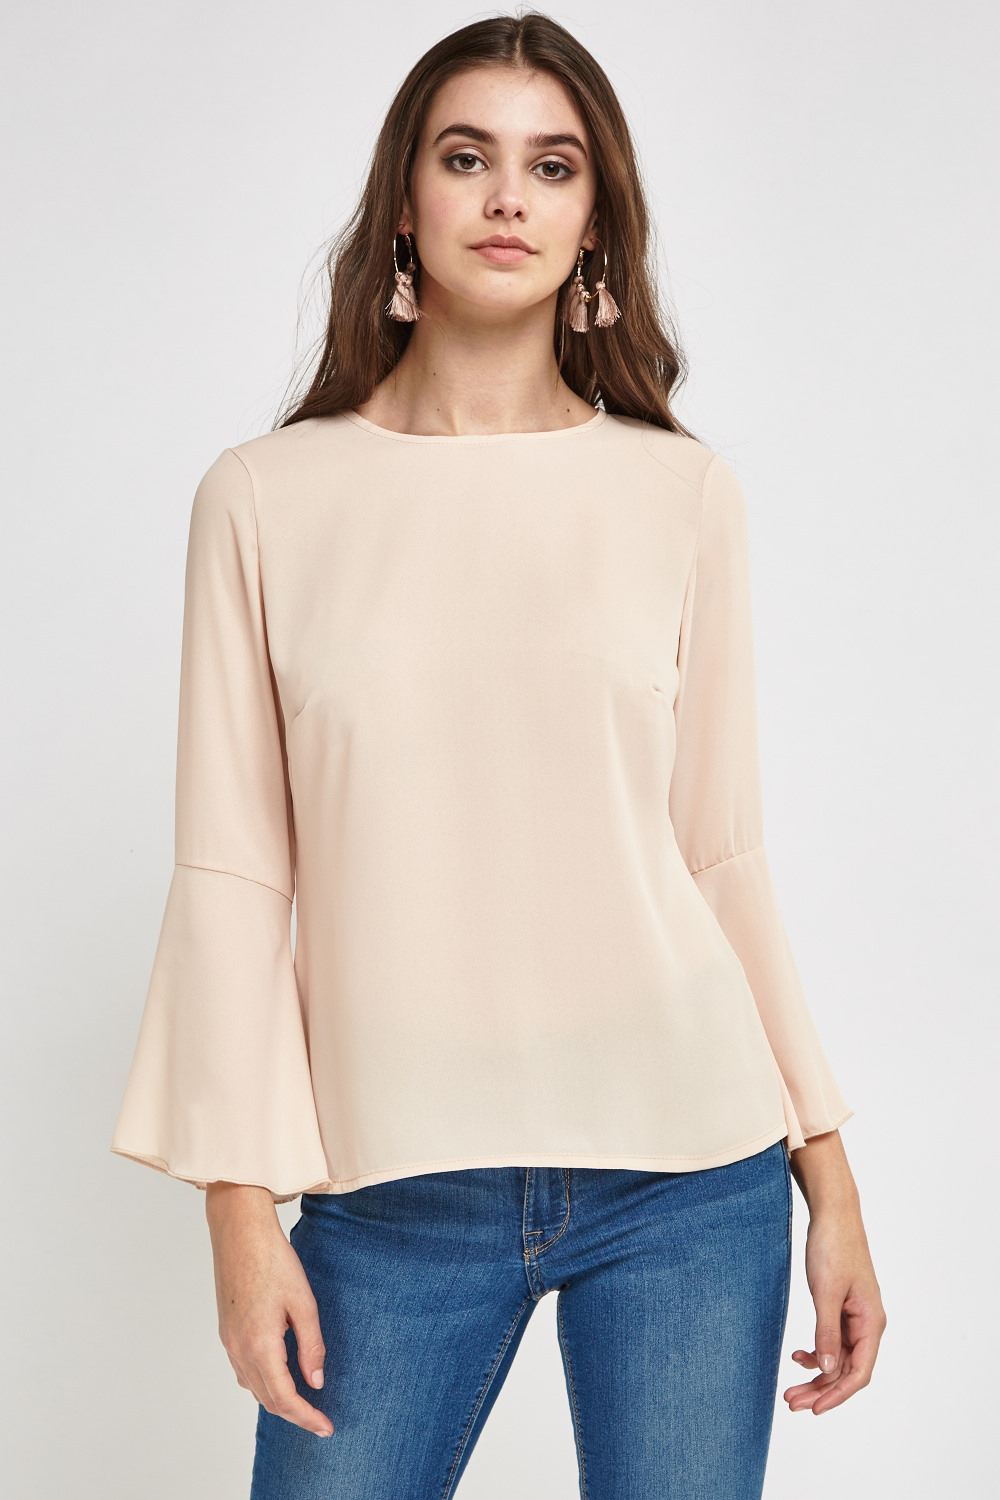 Plain Frilly Sleeve Blouse - Just $6